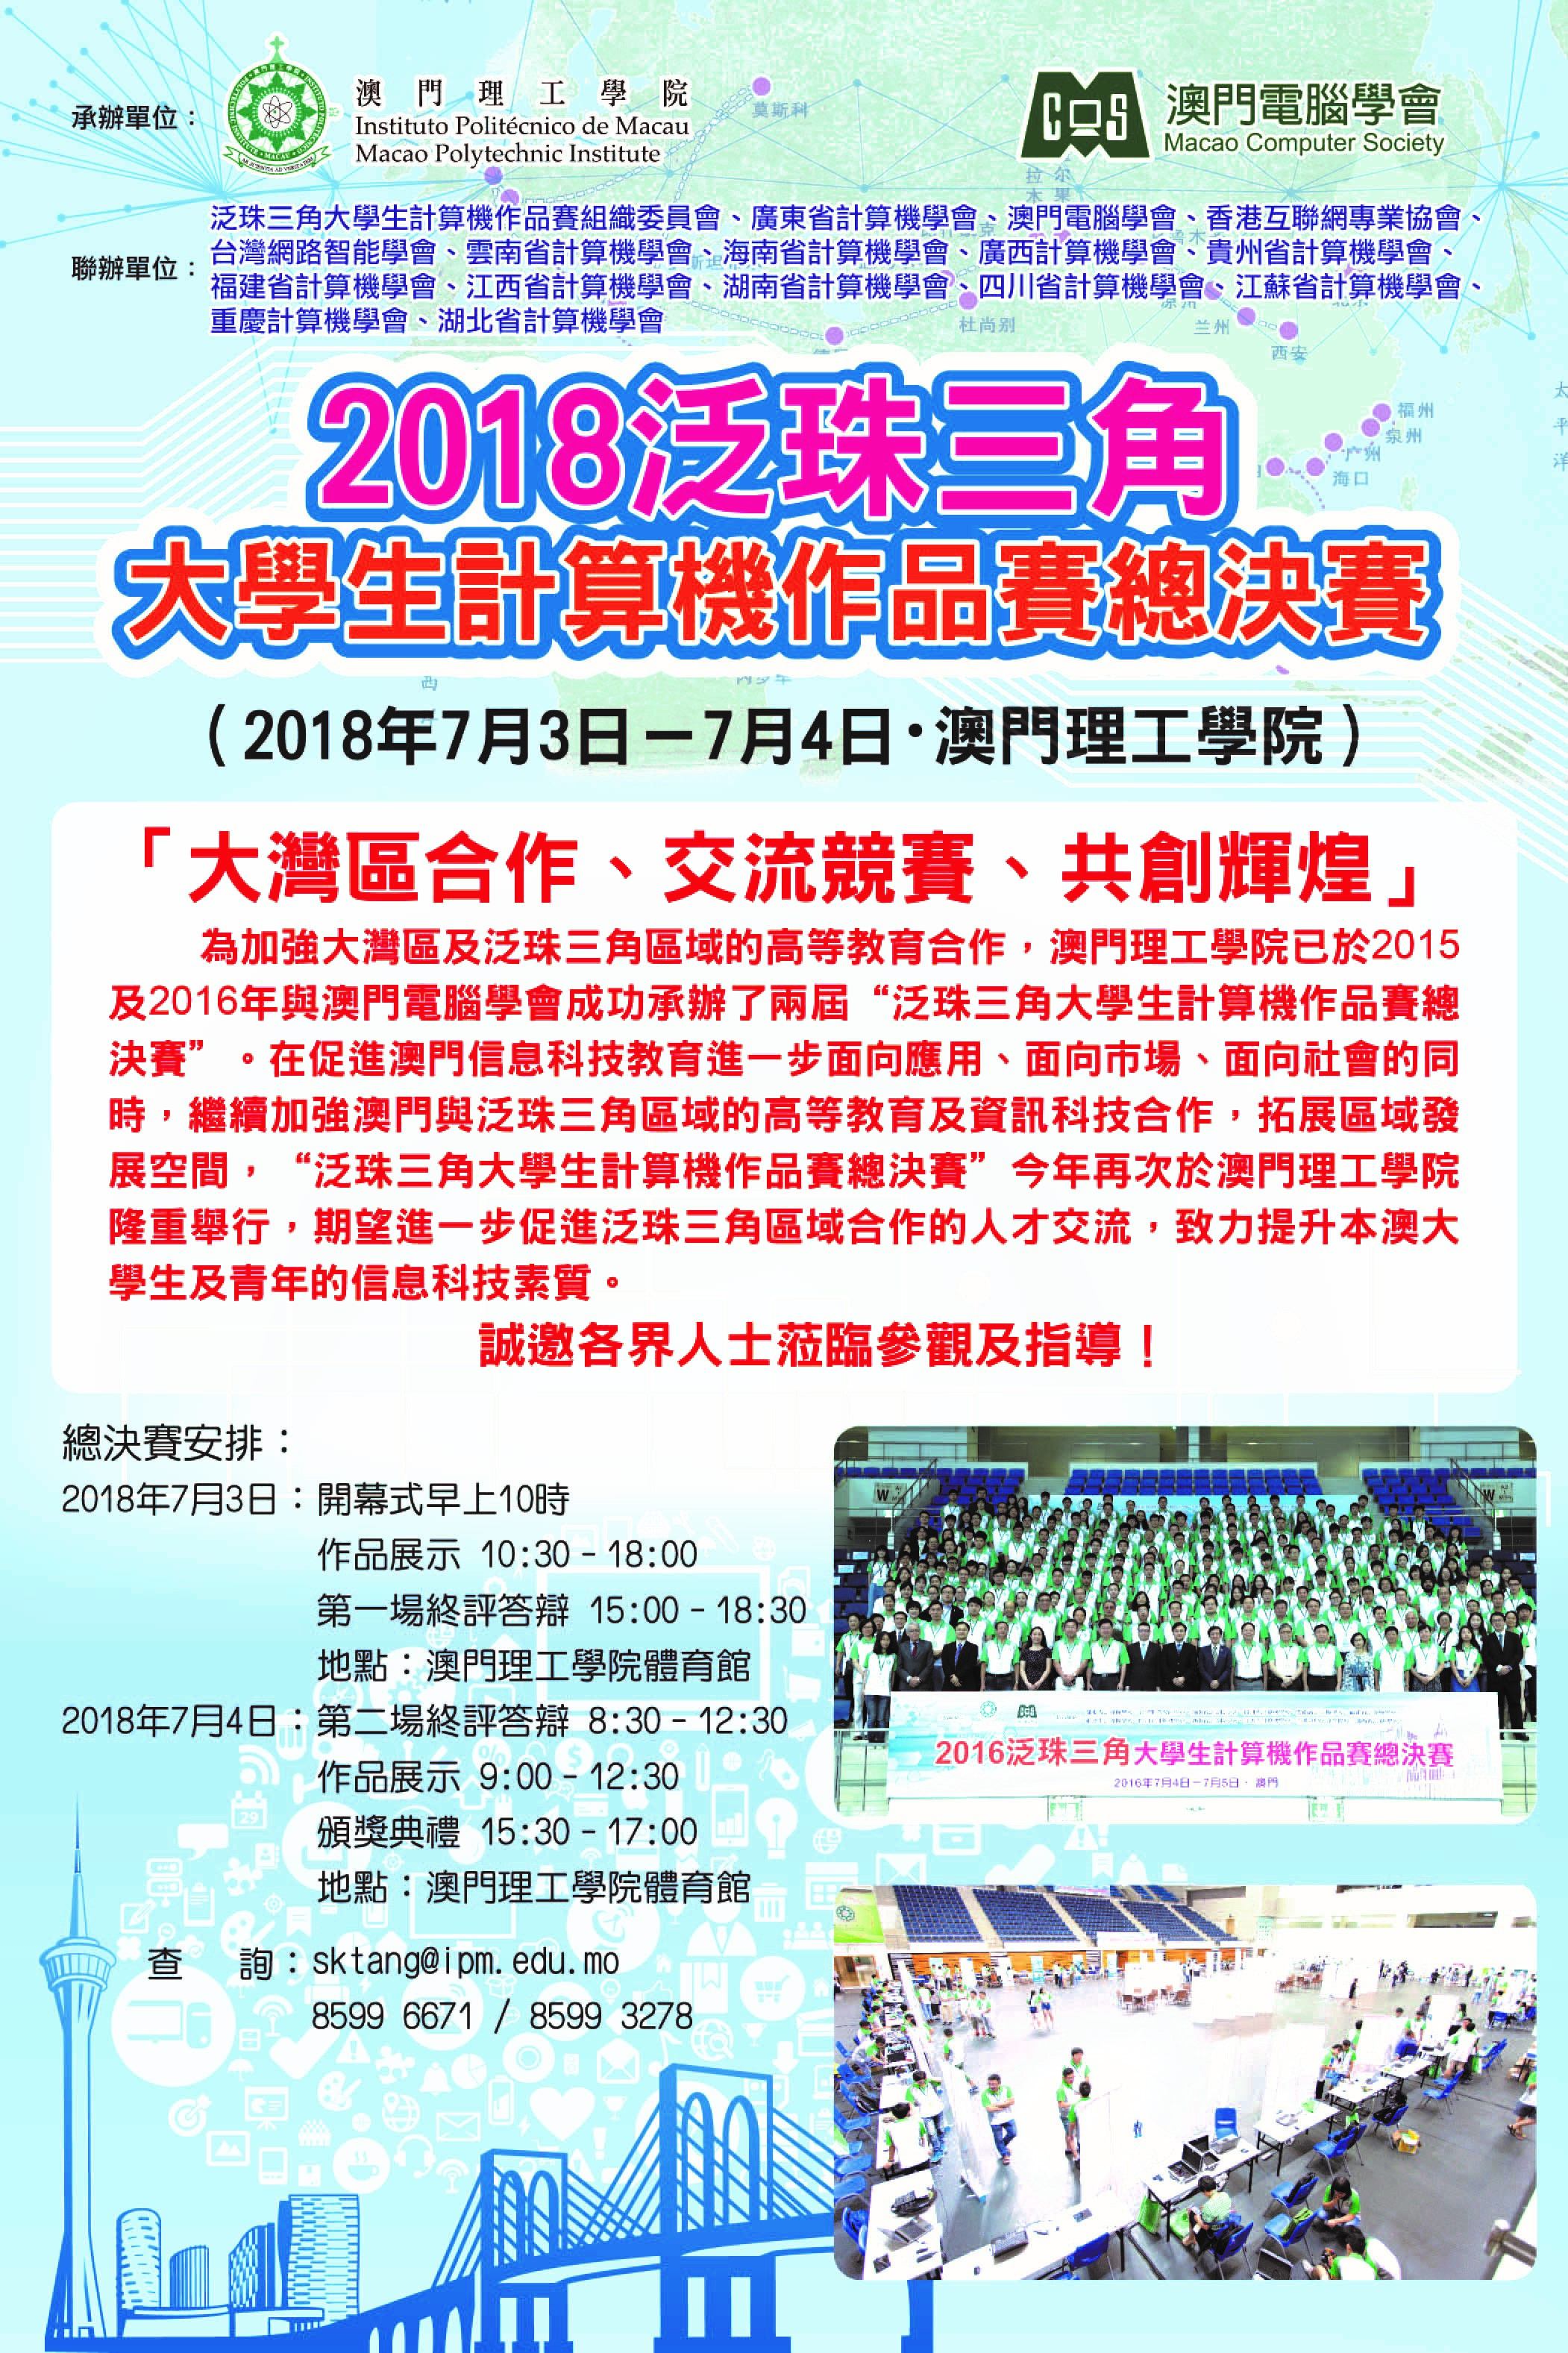 2018 Pan-Pearl River Delta Universities IT Project Competition